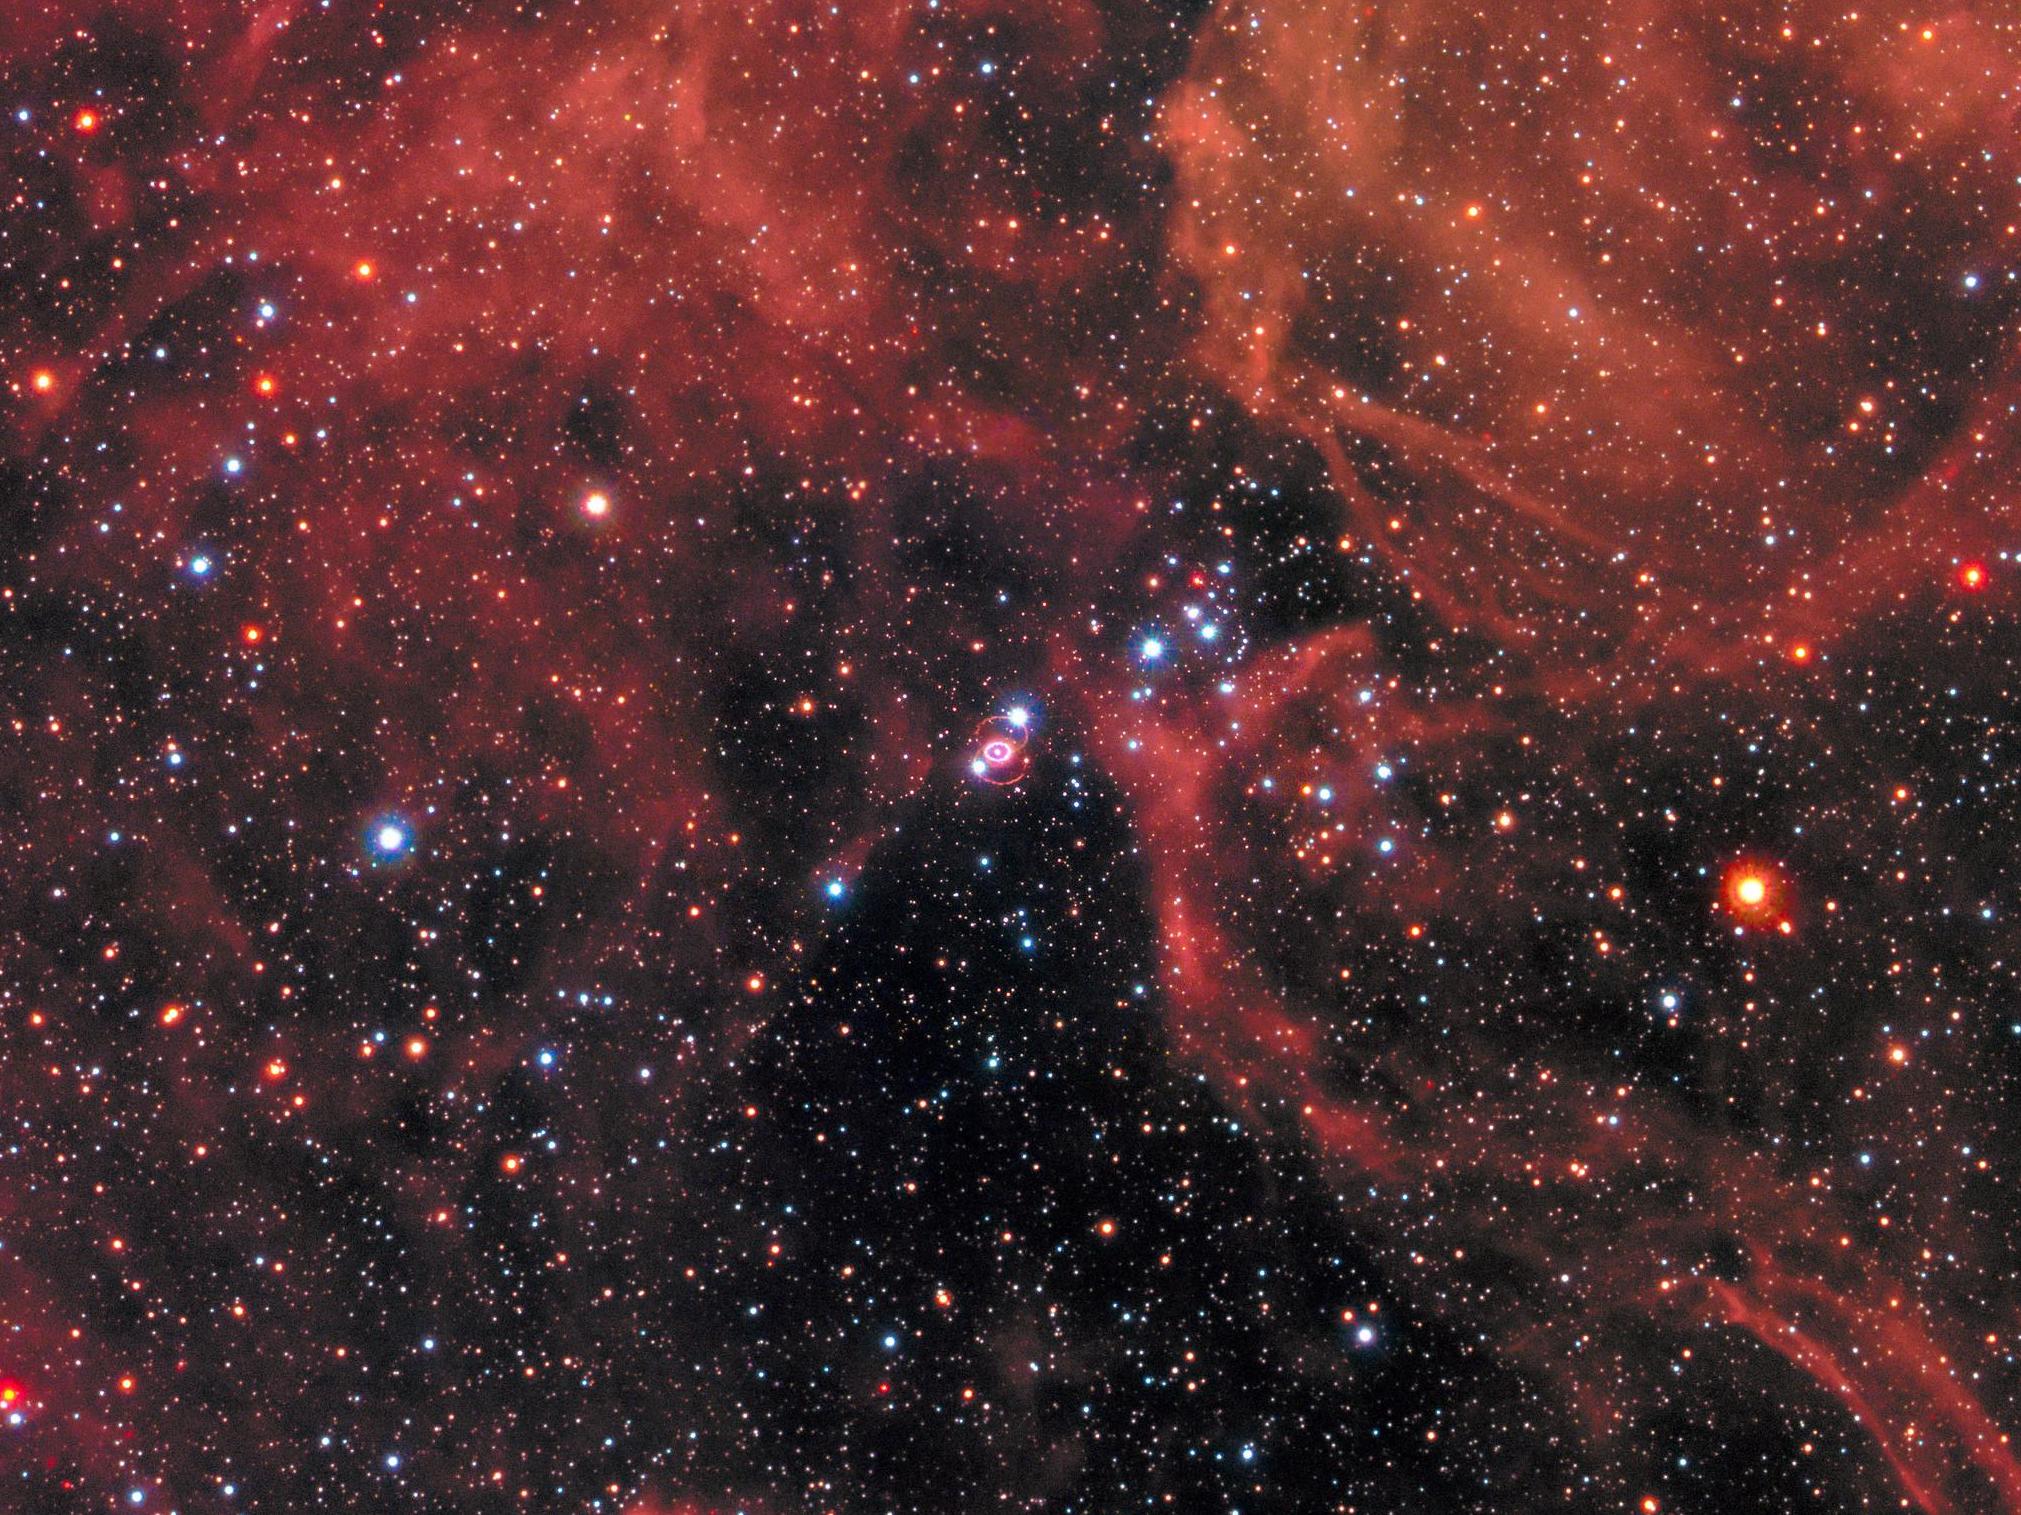 The new image of the supernova remnant SN 1987A